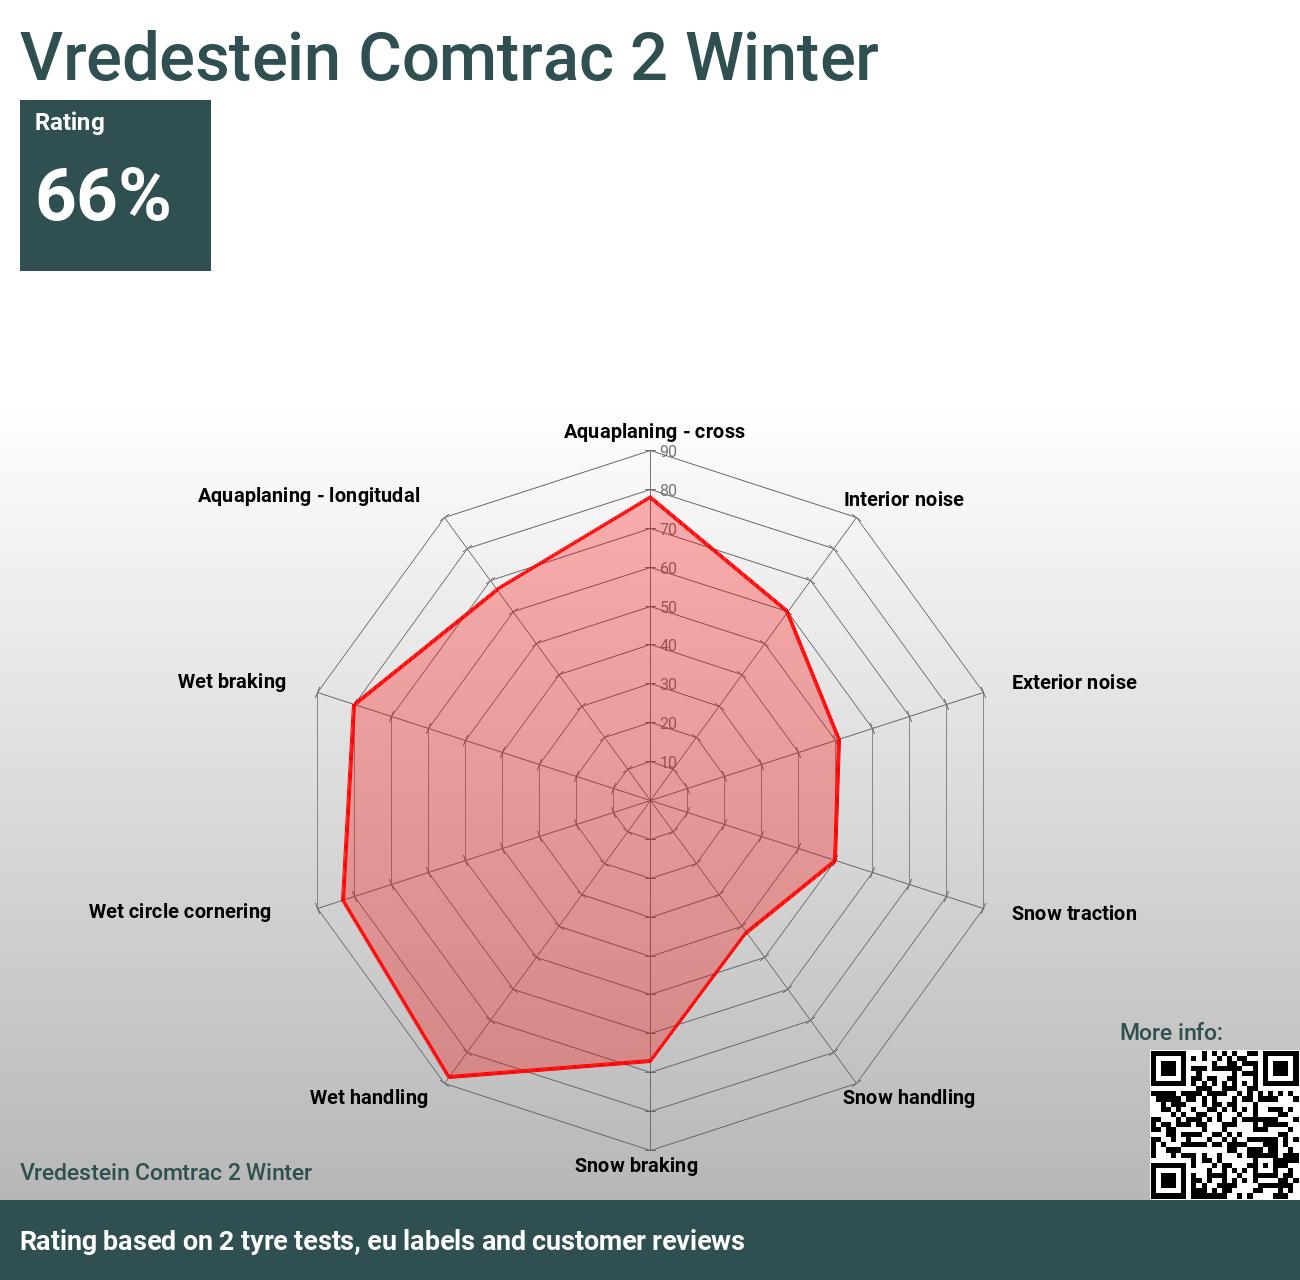 Comtrac Vredestein Winter - 2 Reviews tests and 2024